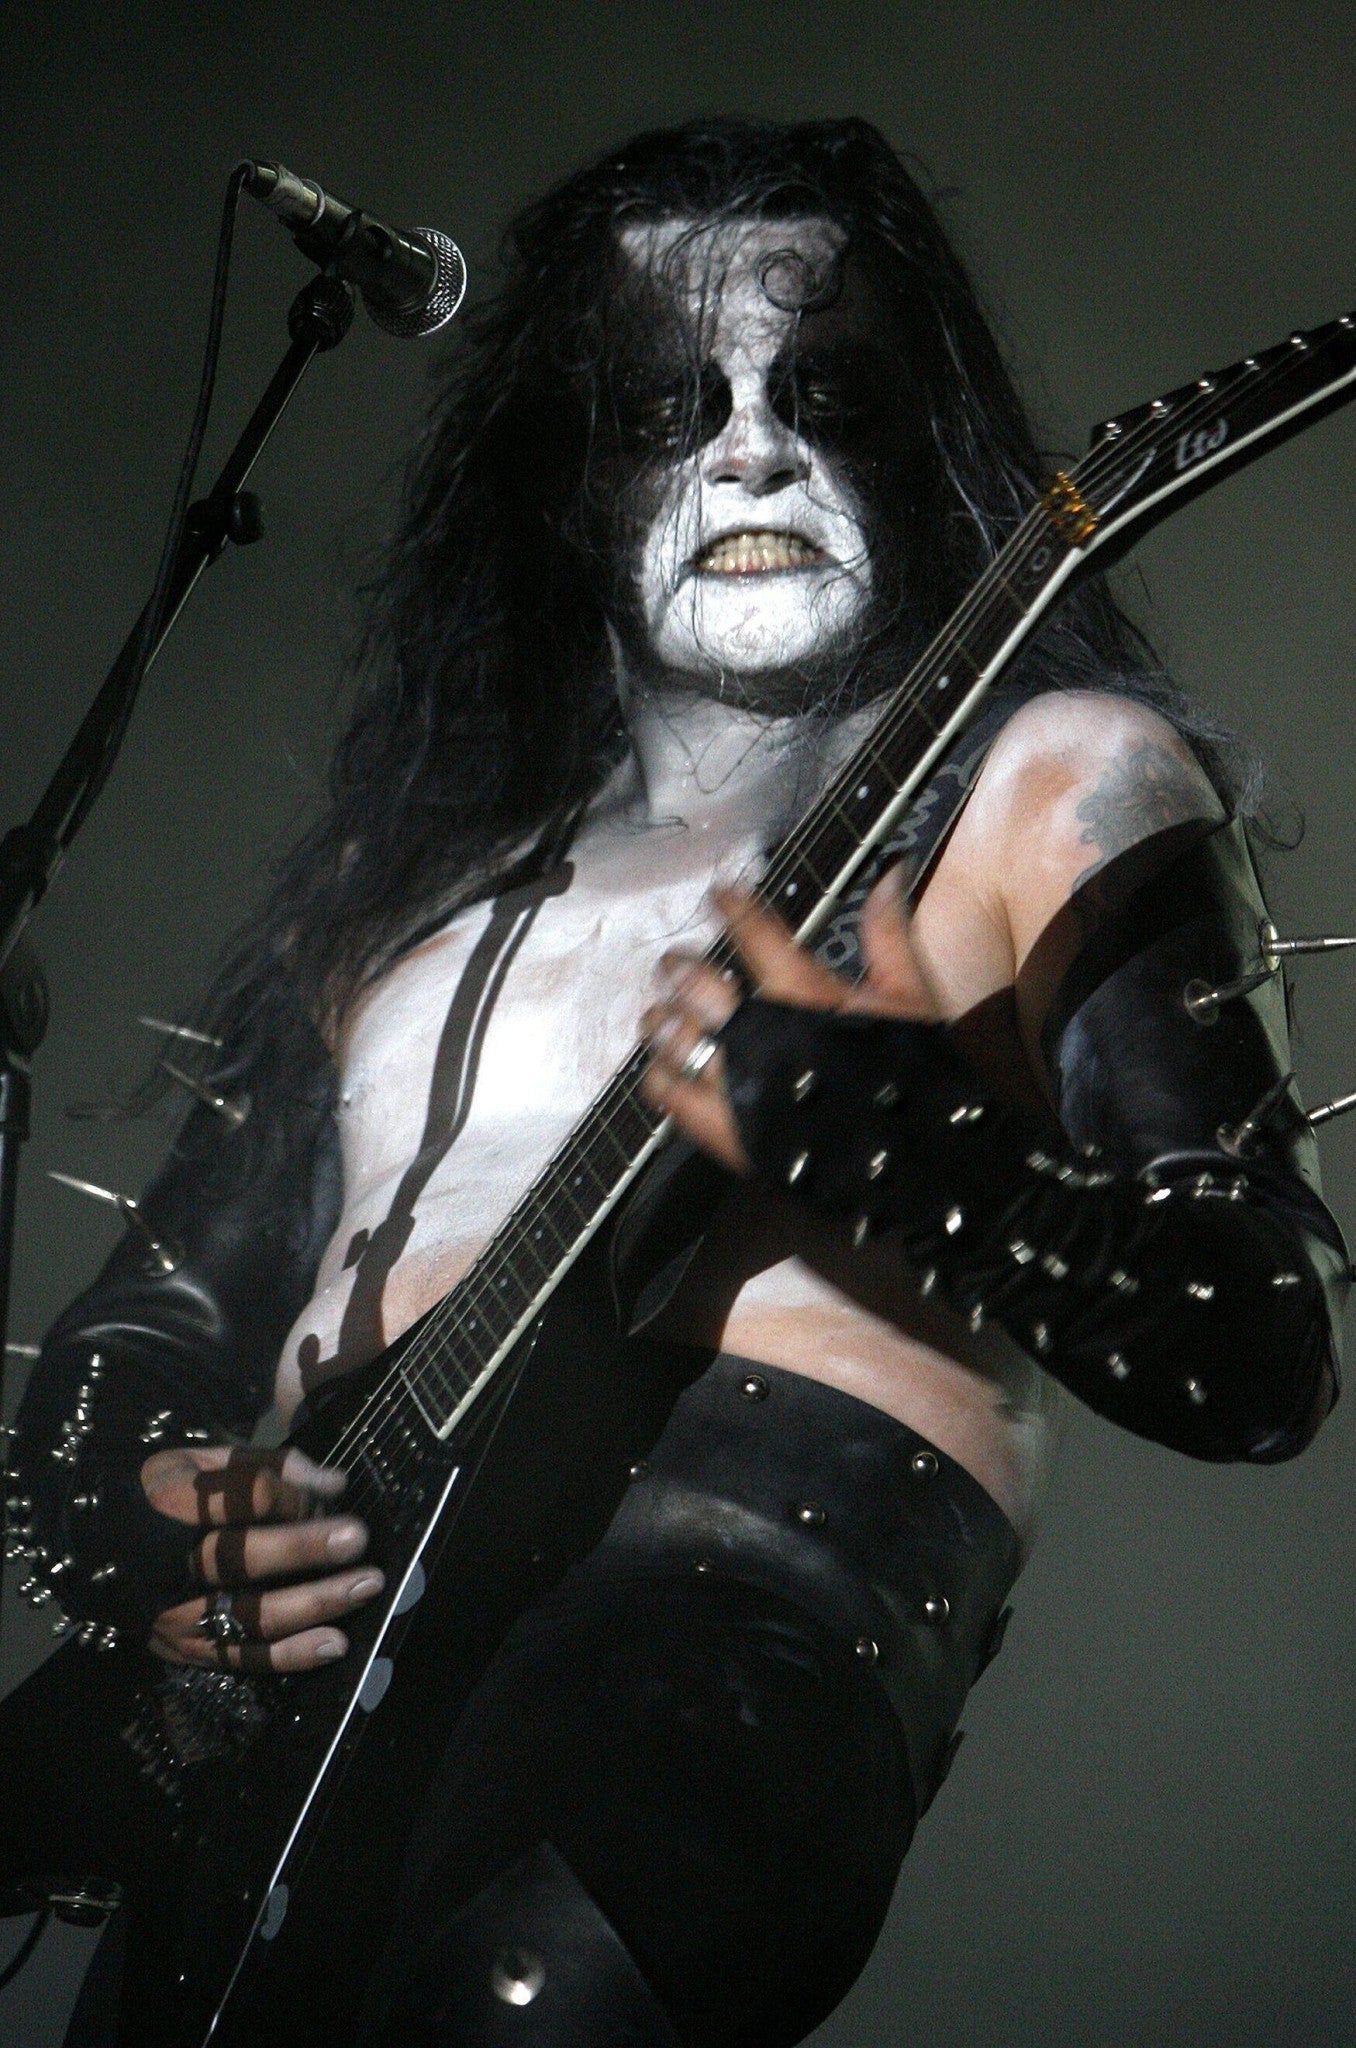 Immortal - Abbath's Portrait Playing Guitar on Stage, Germany, 2007 Poster (2/3)